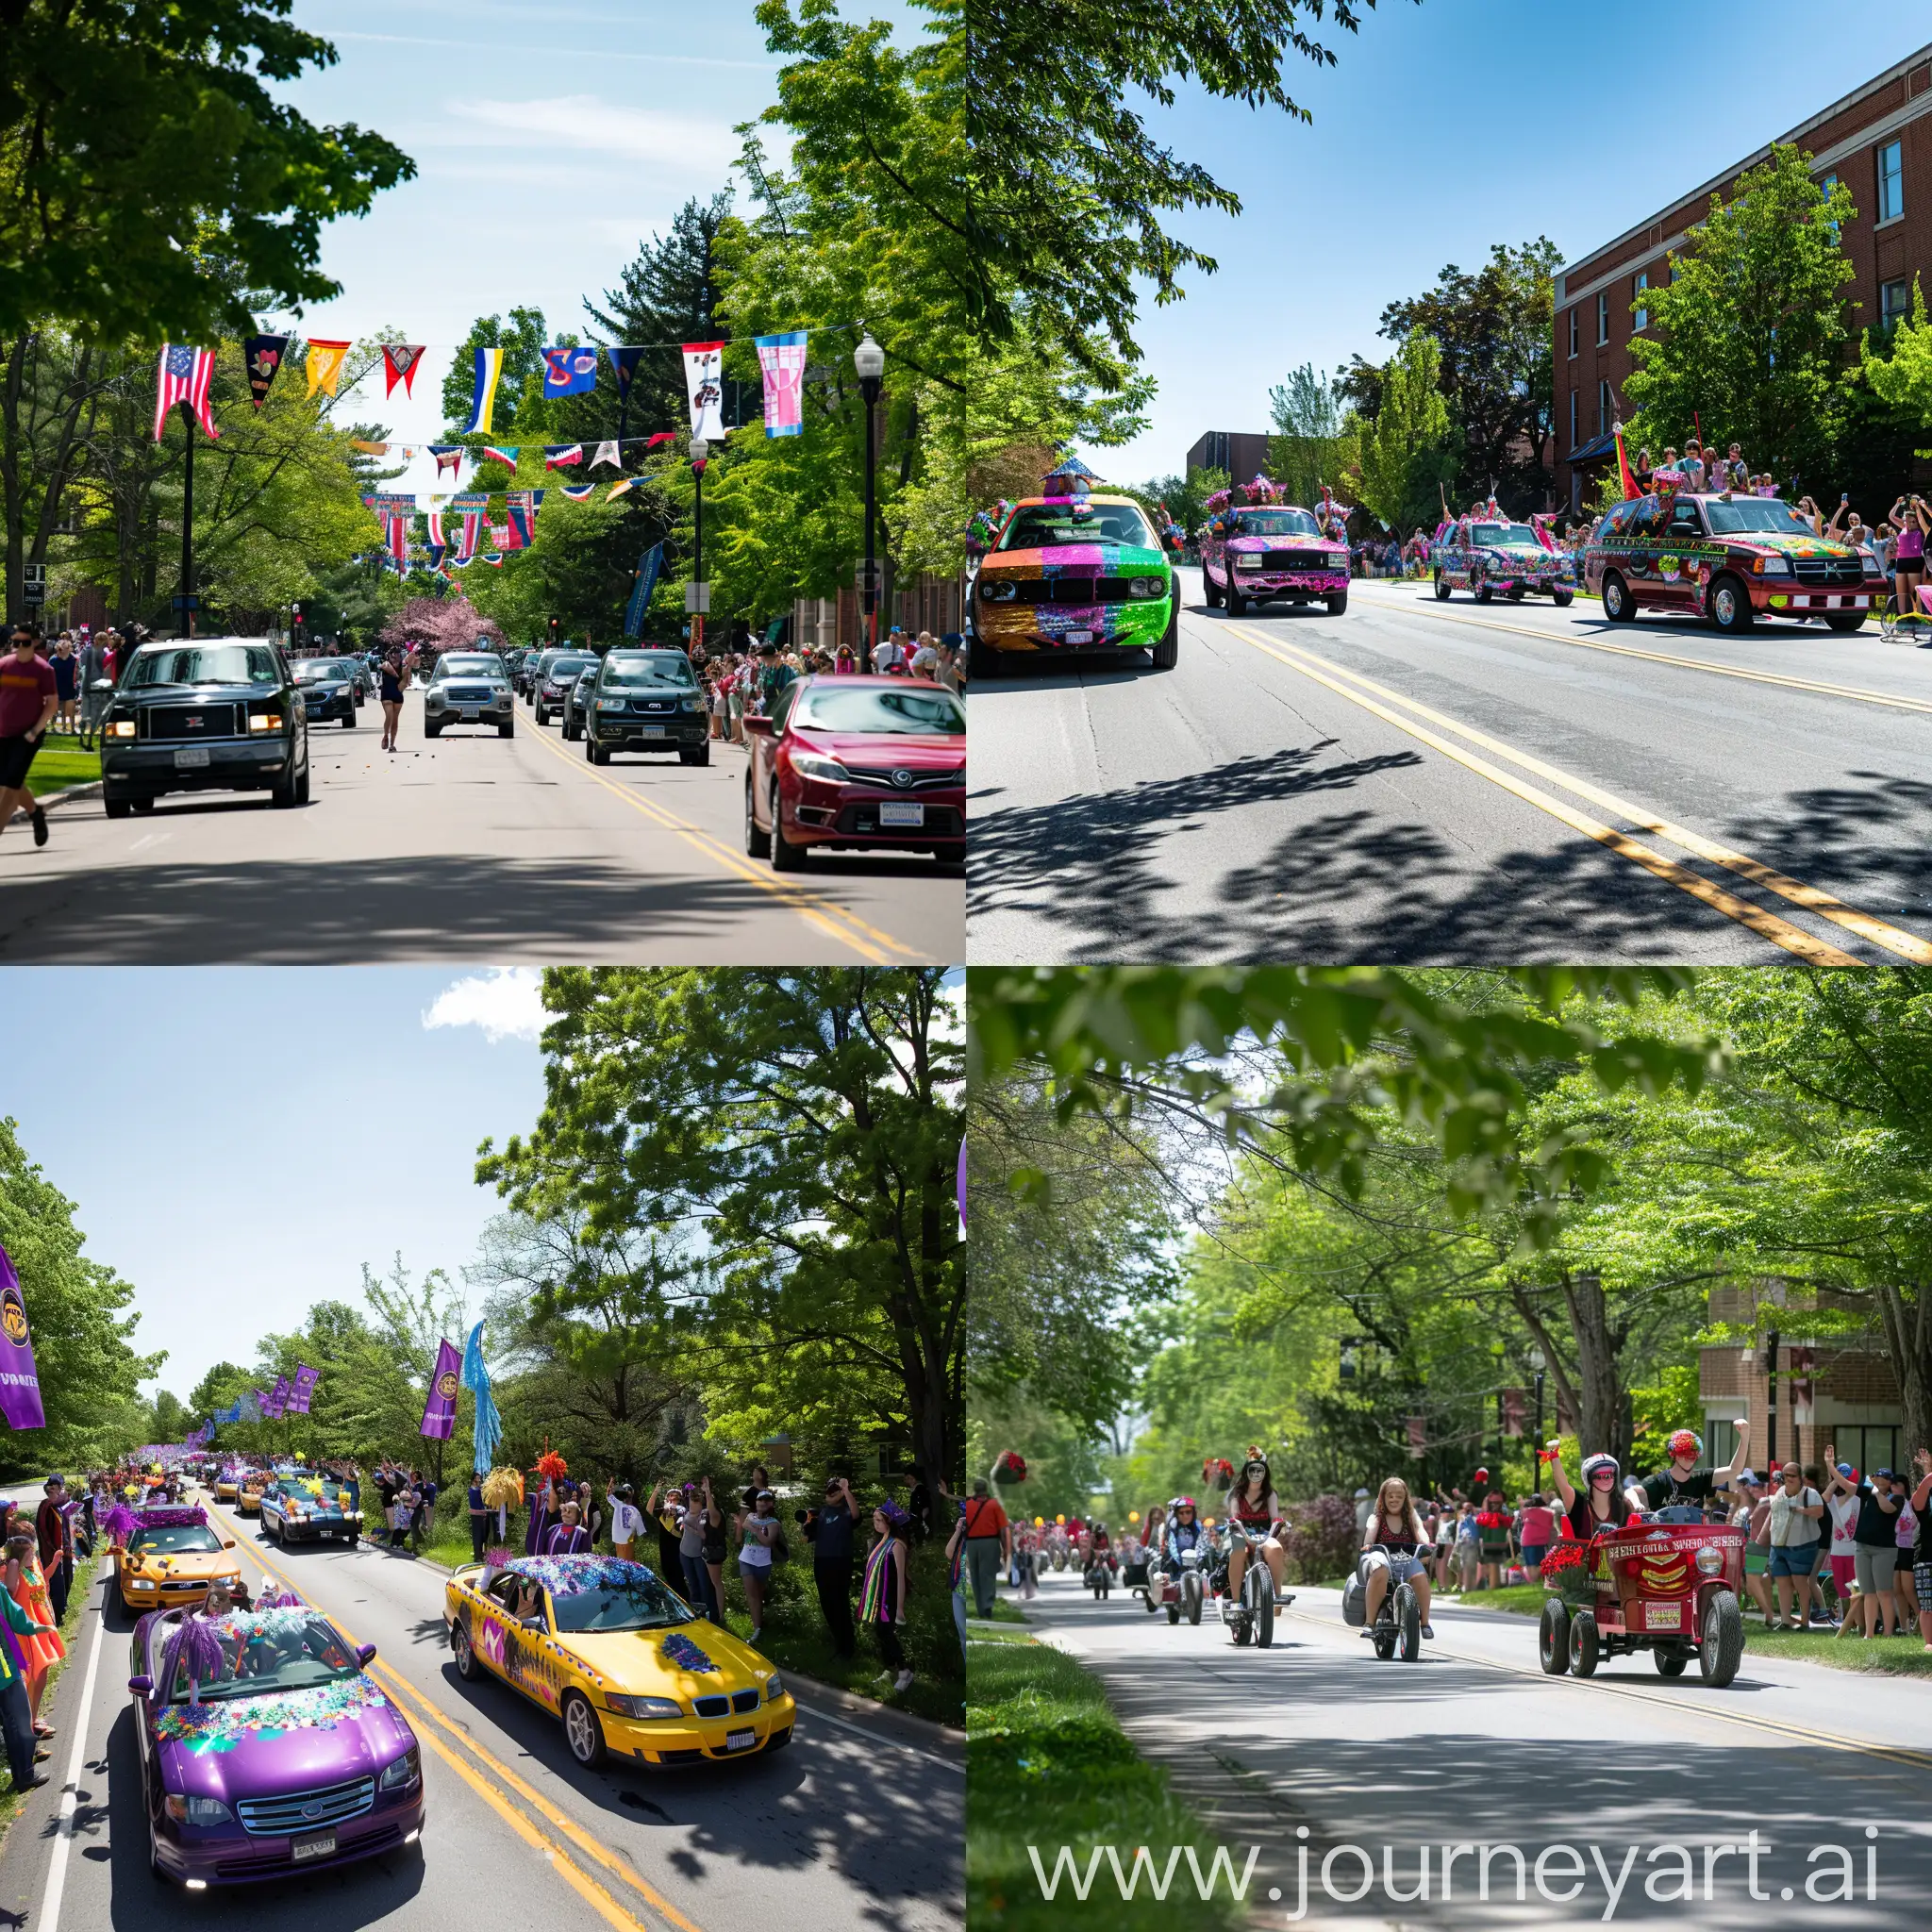 On the day of graduation, a parade will take place around the college campus. Students will decorate their cars, bikes, and other vehicles with school colors and banners. The parade will start at the entrance of the college and end at the graduation ceremony venue. Faculty members and staff will line up along the parade route, waving and cheering for the graduates. 